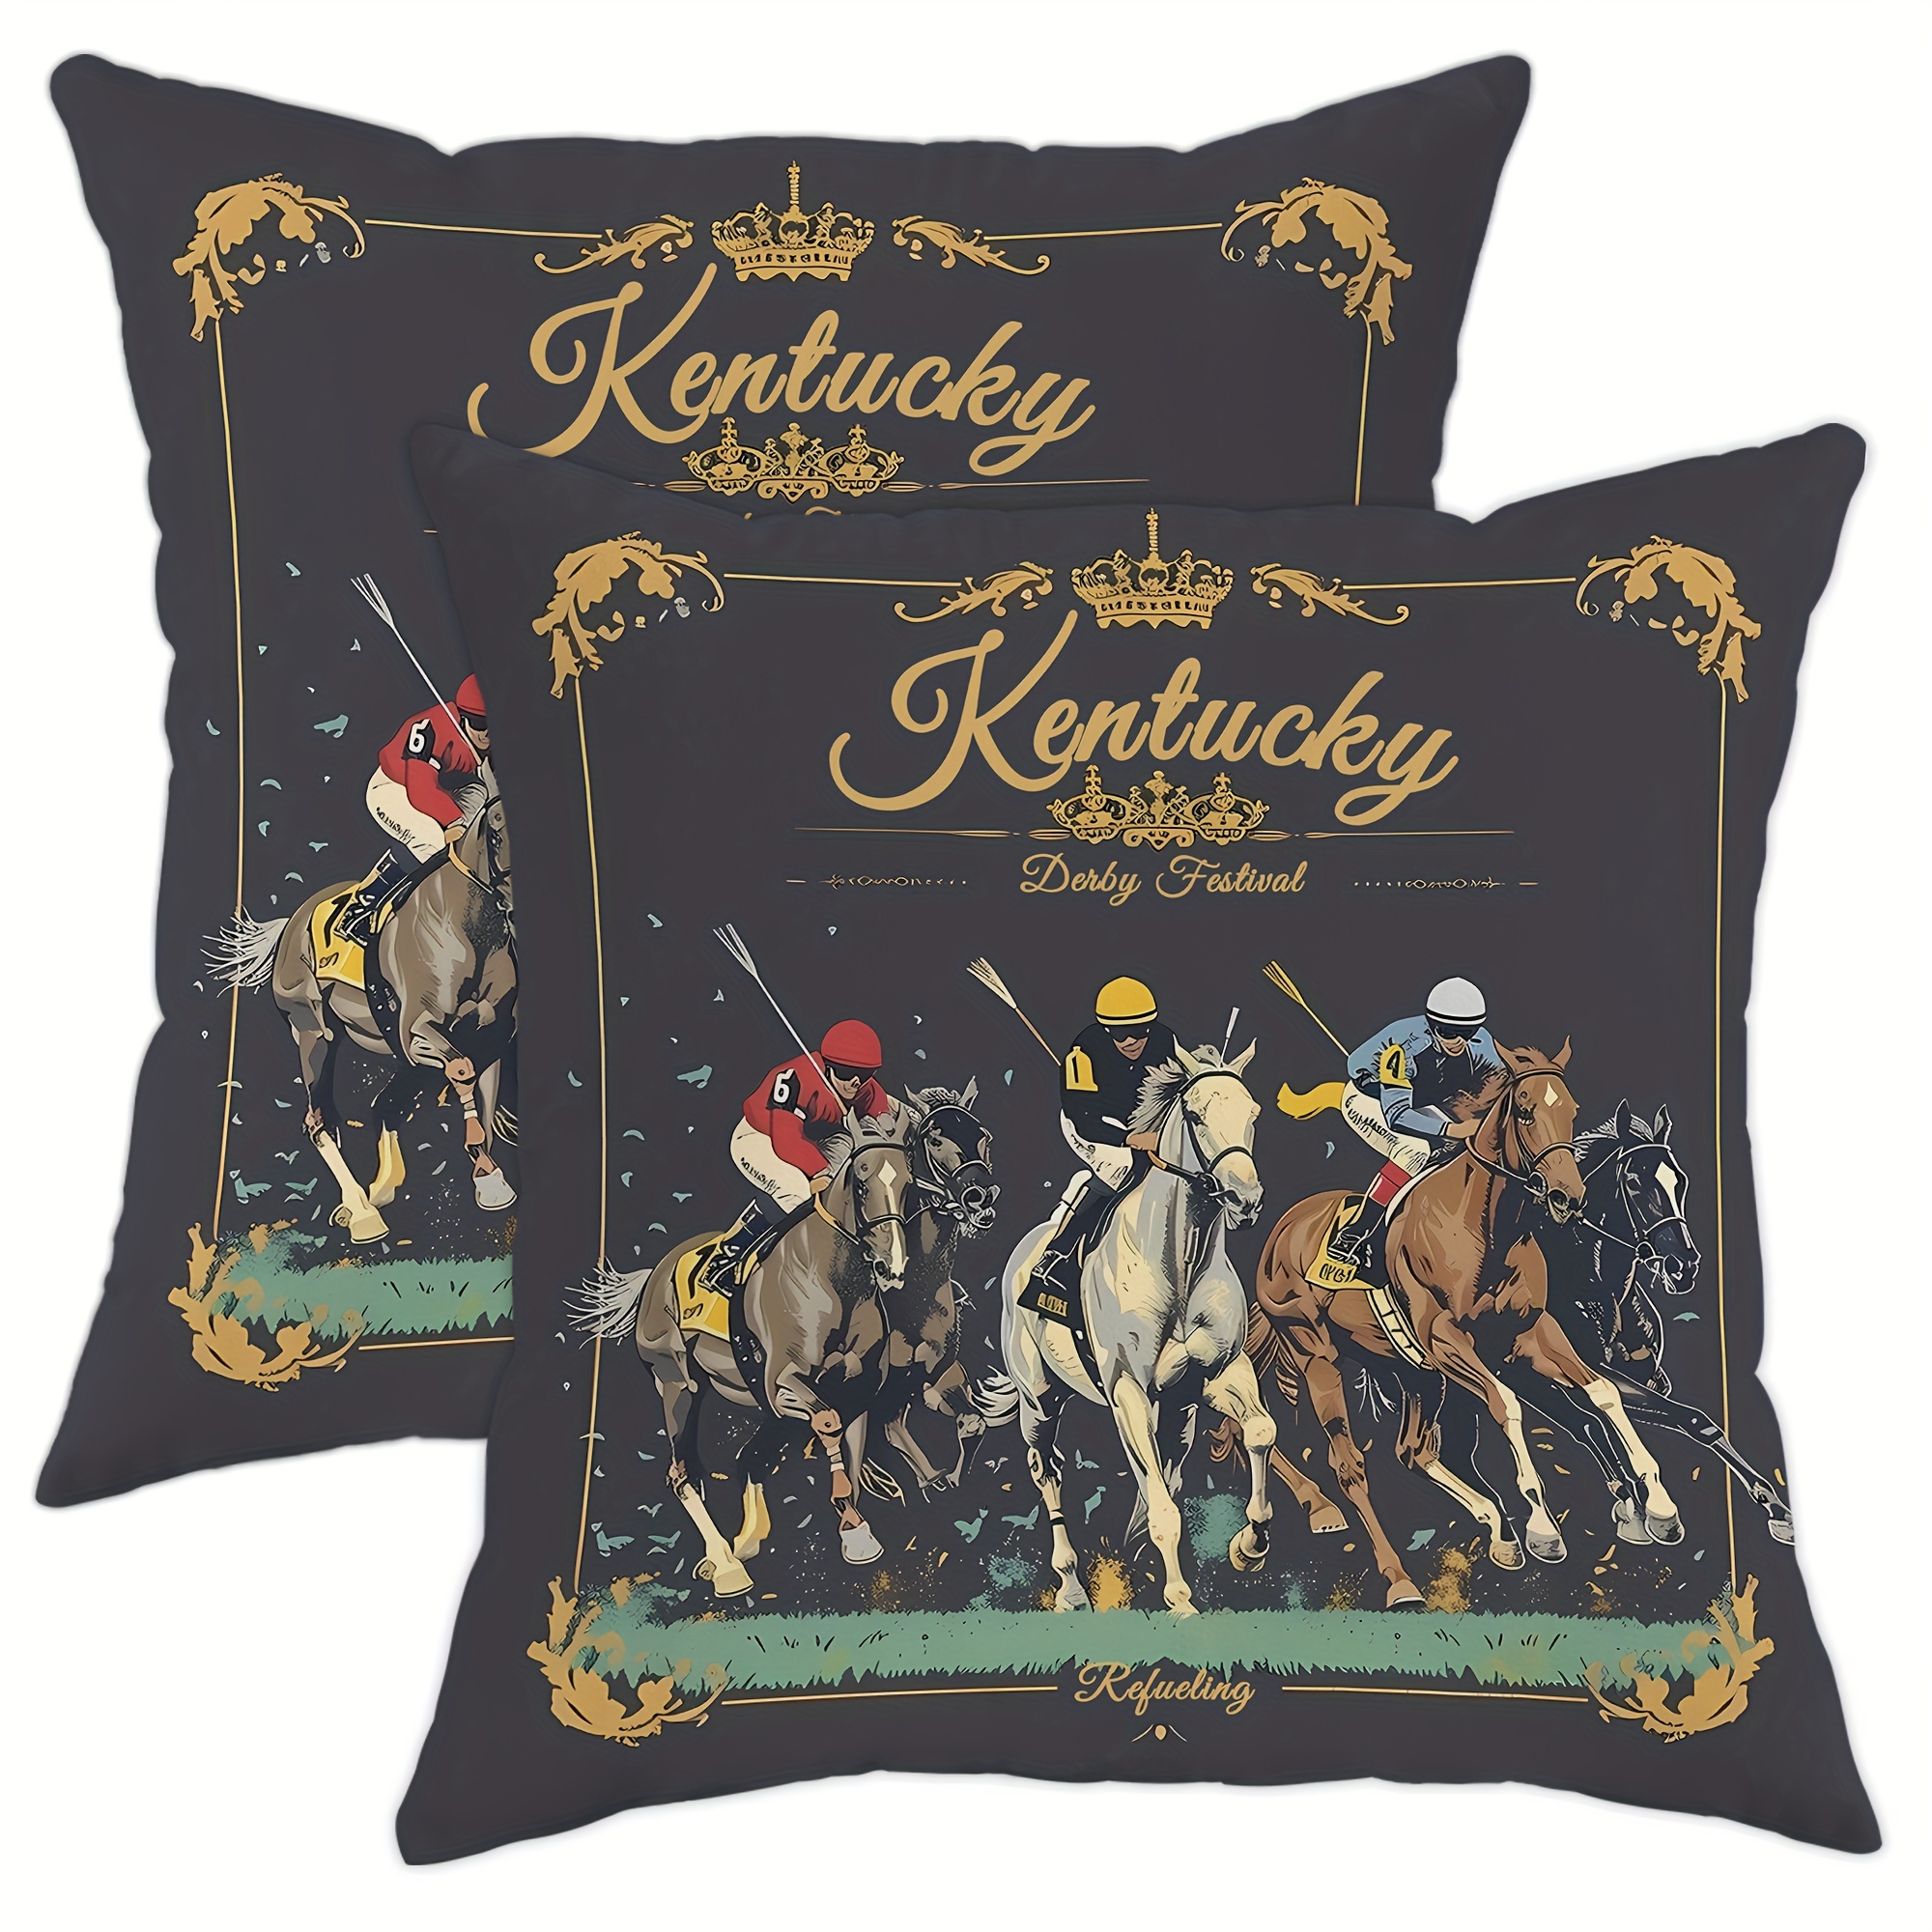 

2pcs Racing Black Green Polyester Throw Pillow Covers, Kentucky Derby Retro Farmhouse Throw Pillow Covers, Decorative Cushion Covers 18*18 Inch, Suitable For Living Room, Bedroom, Sofa Bed Decoration